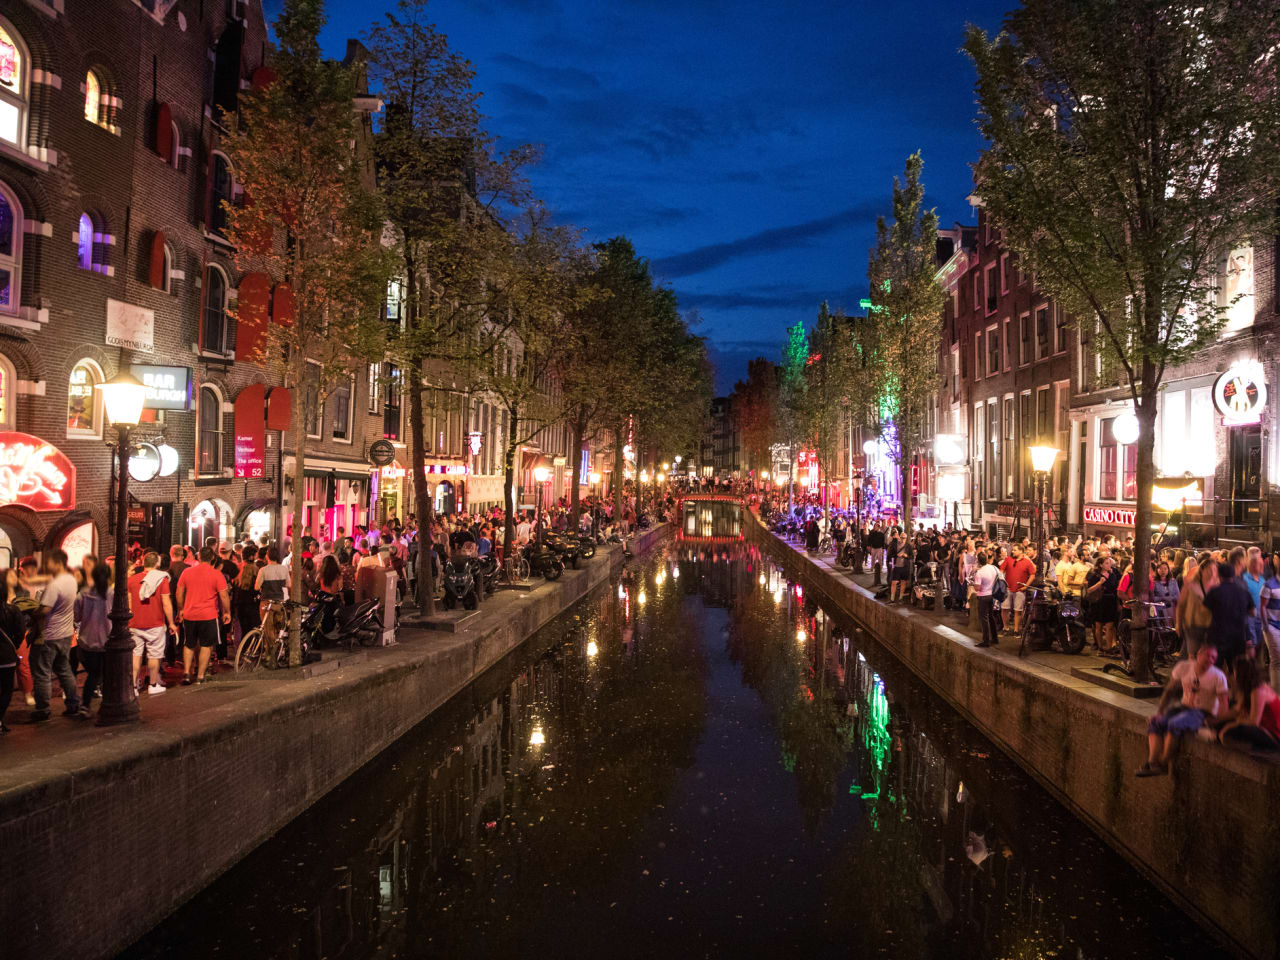 Partymeile in Amsterdam © LeoPatrizi/iStock / Getty Images Plus via Getty Images